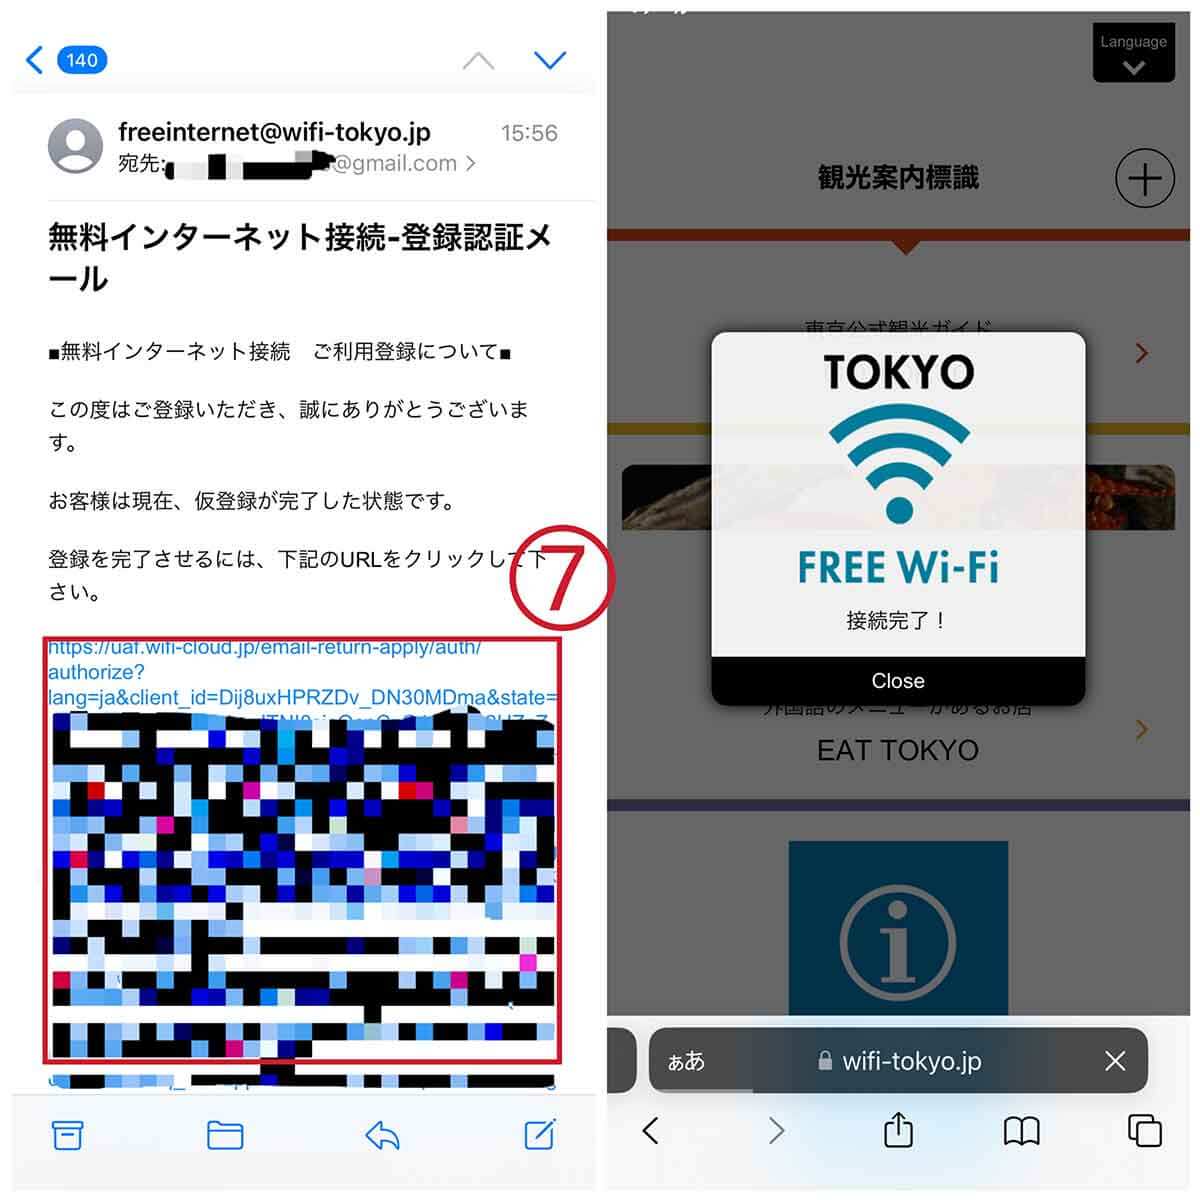 FREE_Wi-Fi_and_TOKYO4